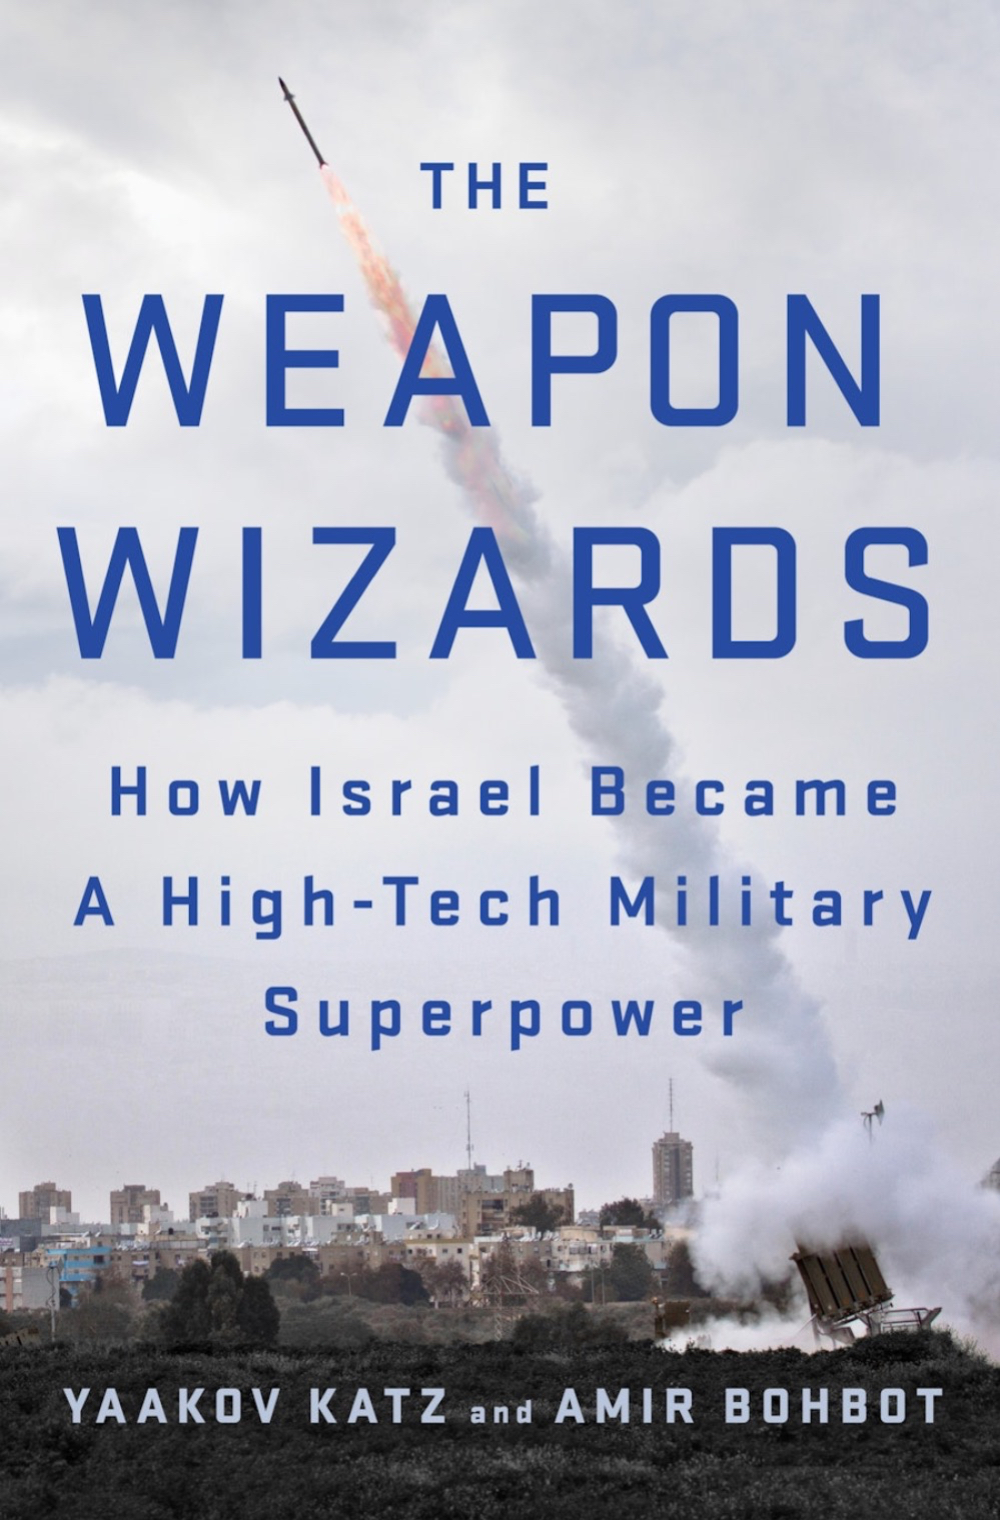 WEAPON WIZARDS - HOW ISRAEL BECAME A HIGH TECH MILITARY SUPERPOWER